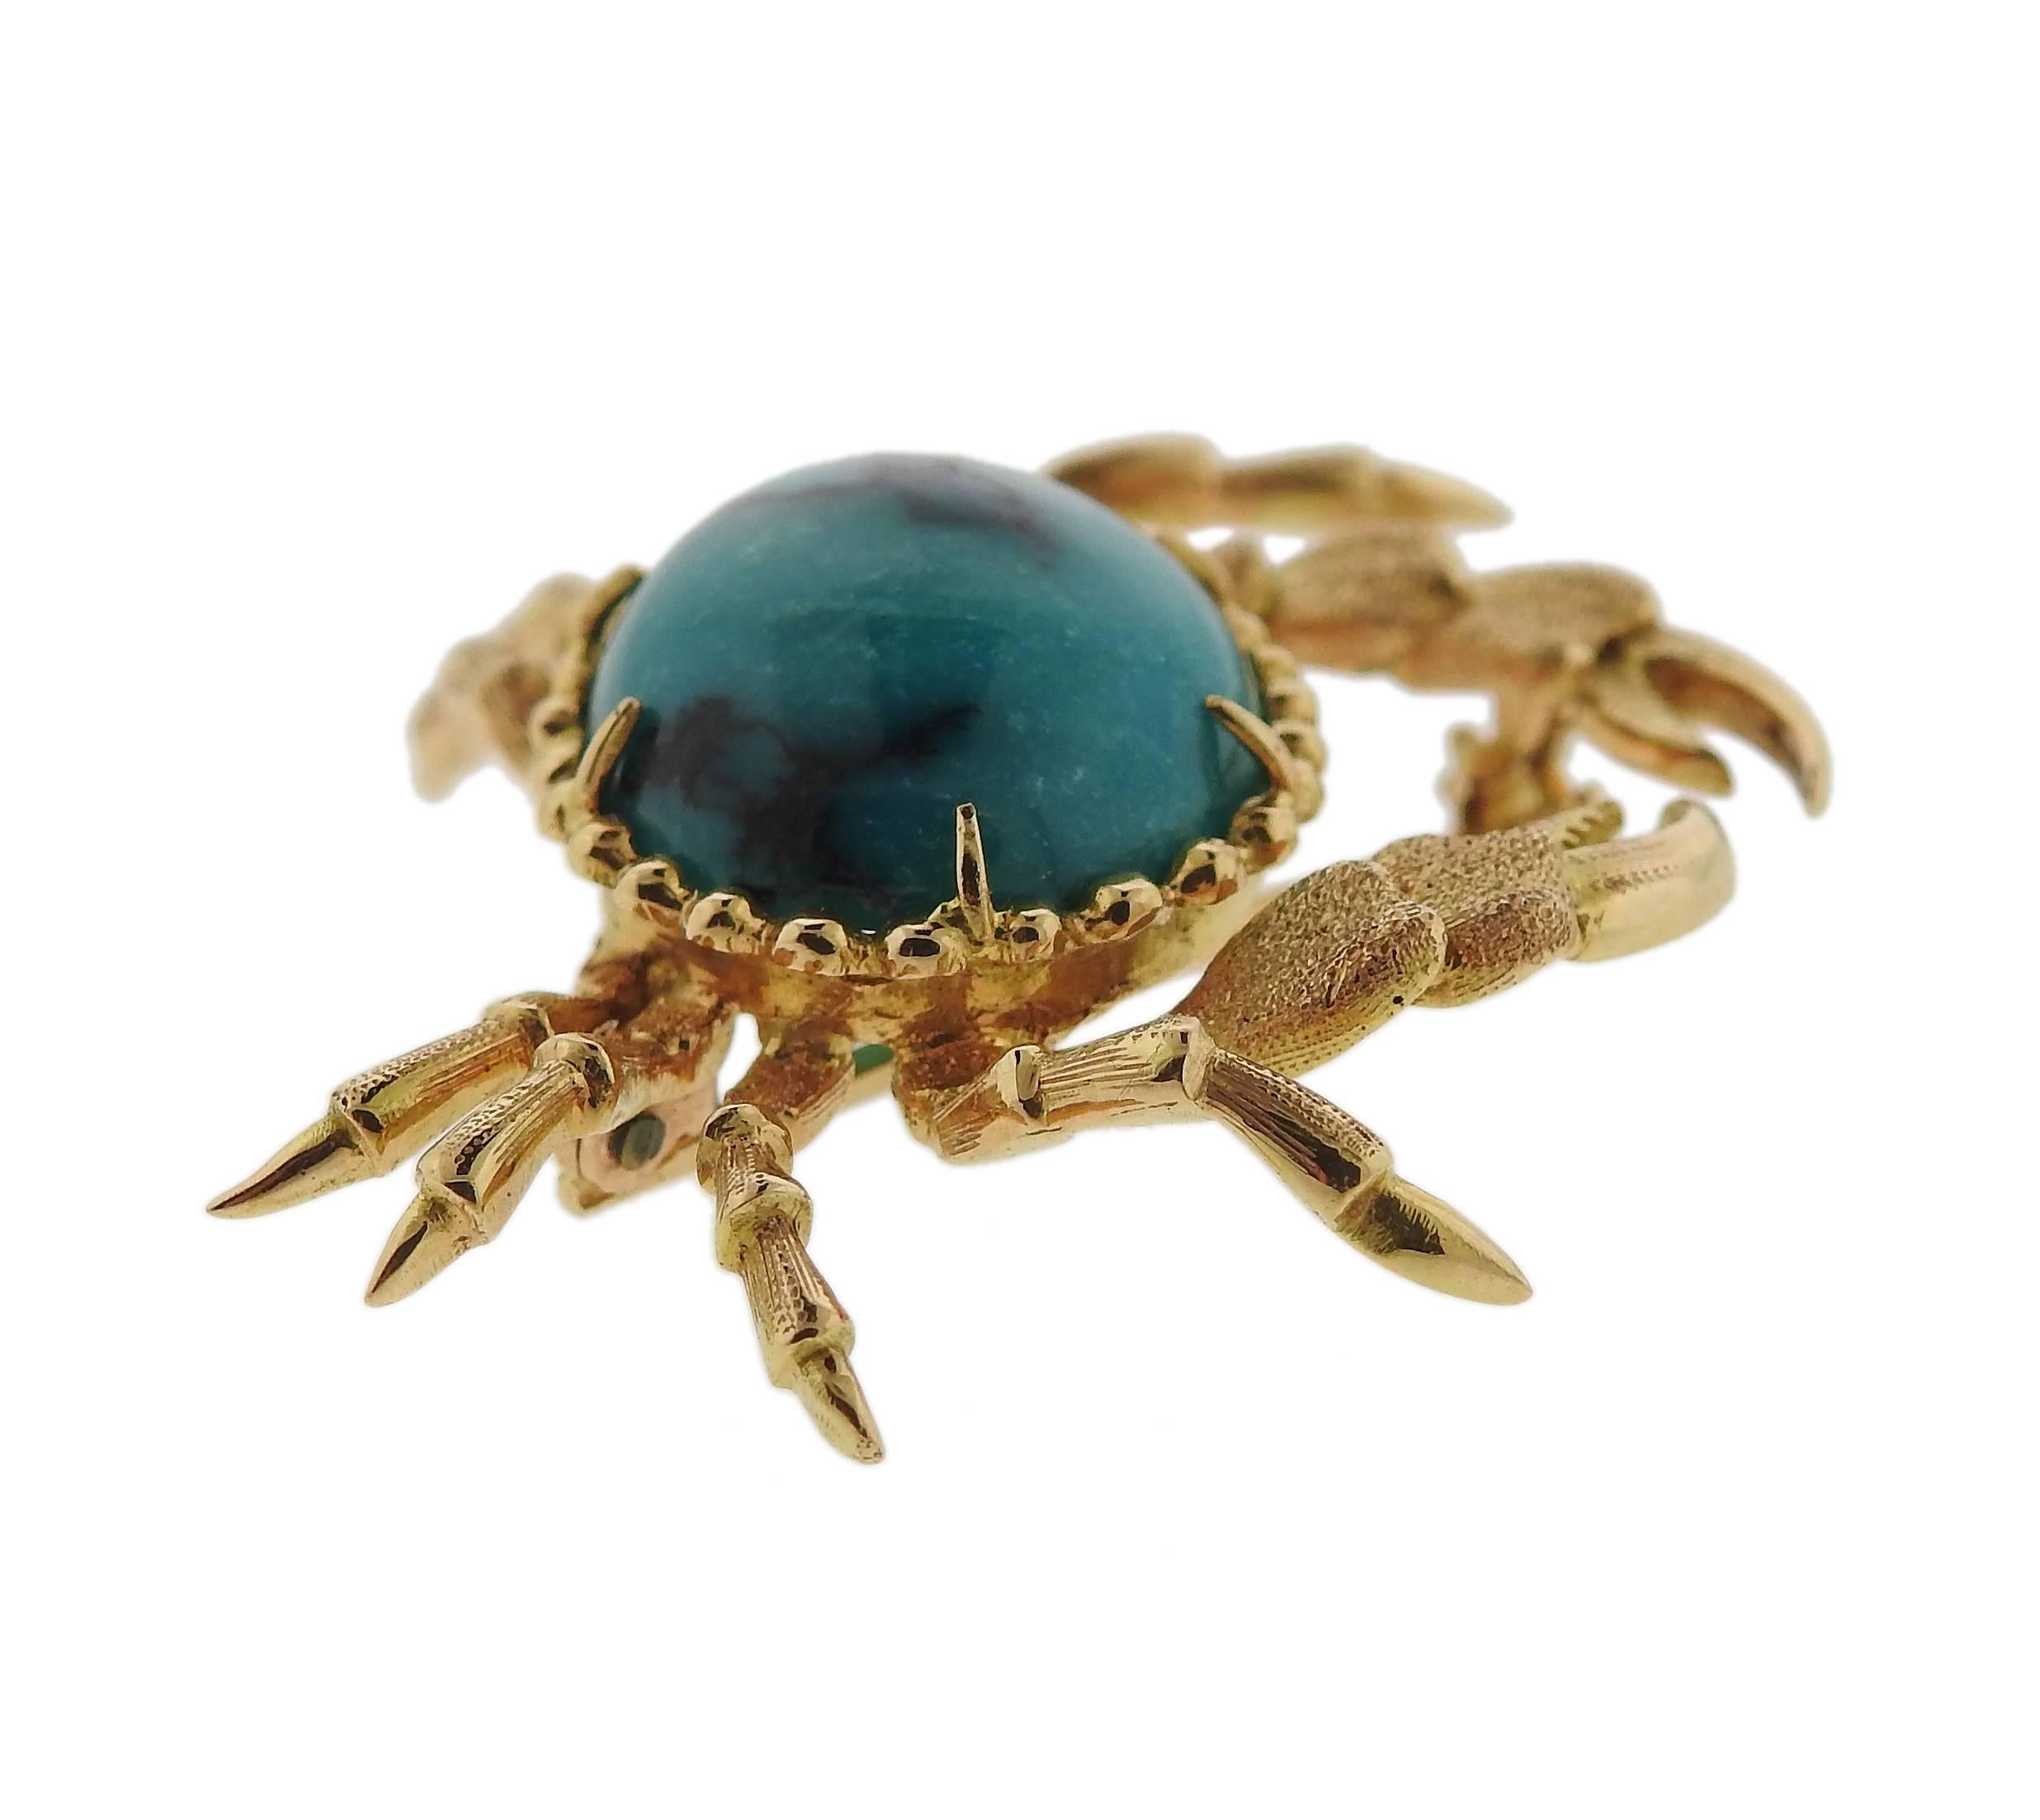 An 18k gold brooch pin depicting a crab. Set with a blue stone. Brooch measures 40mm x 32mm. Marked 750, Italian gold mark. Weight is 11.6 grams. 